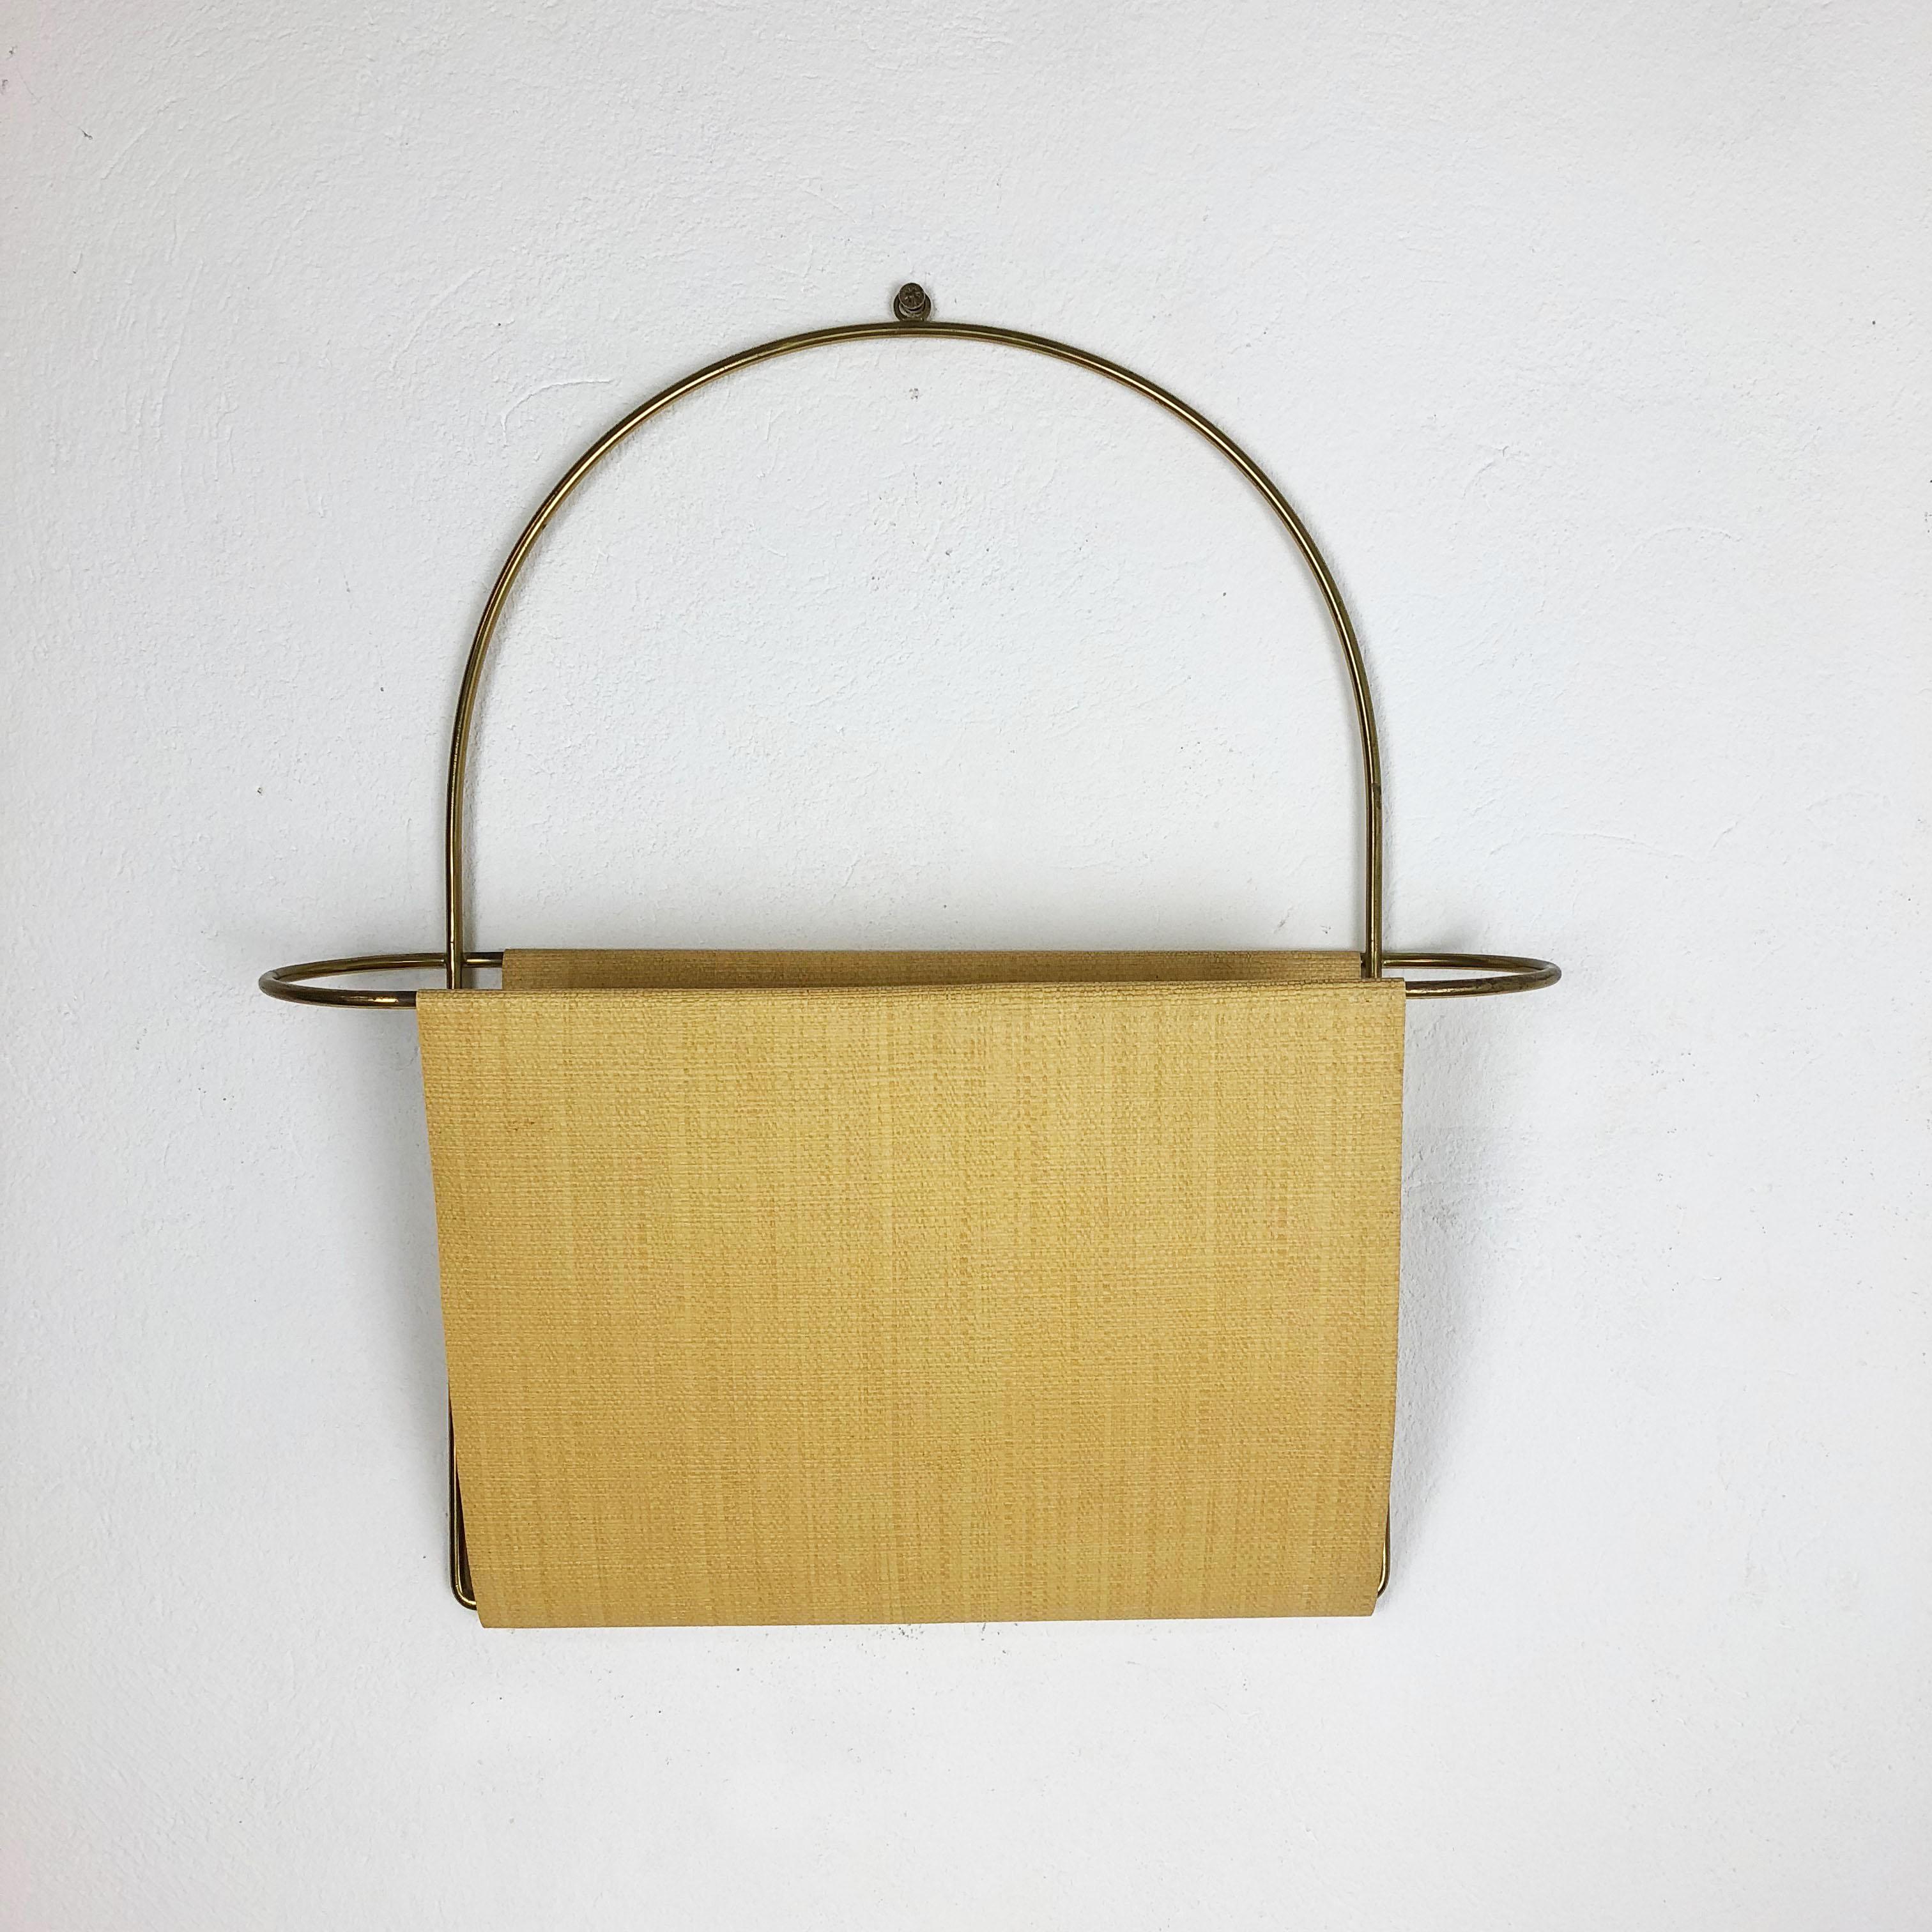 Article:

Wall magazine rack 

Origin:

Austria

Age:

1950s

Original vintage wall hanging magazine rack. This element was produced in the 1950s in Austria. The wall hanging and frame of this wall holder is made of brass, the storing compartment